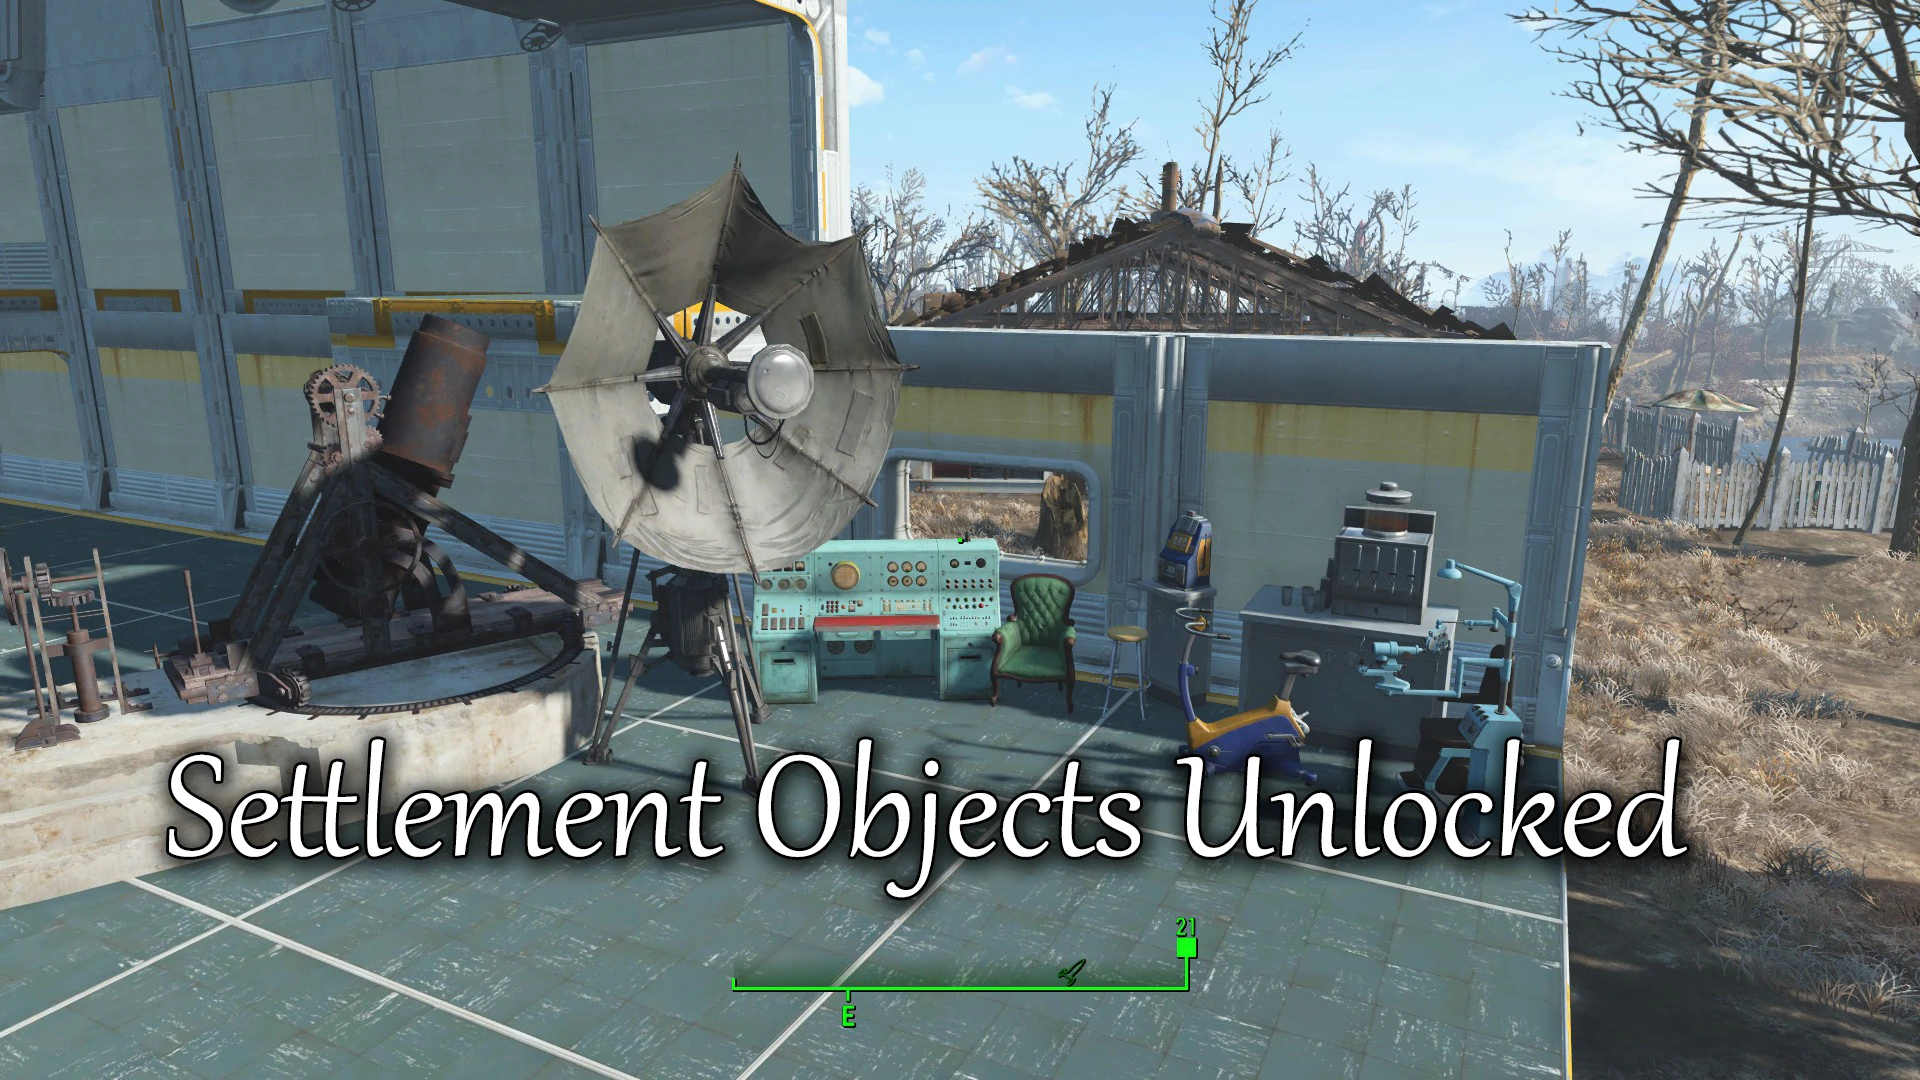 Fallout 4 uso wasteland workshop add on for unlocked settlement objects фото 4